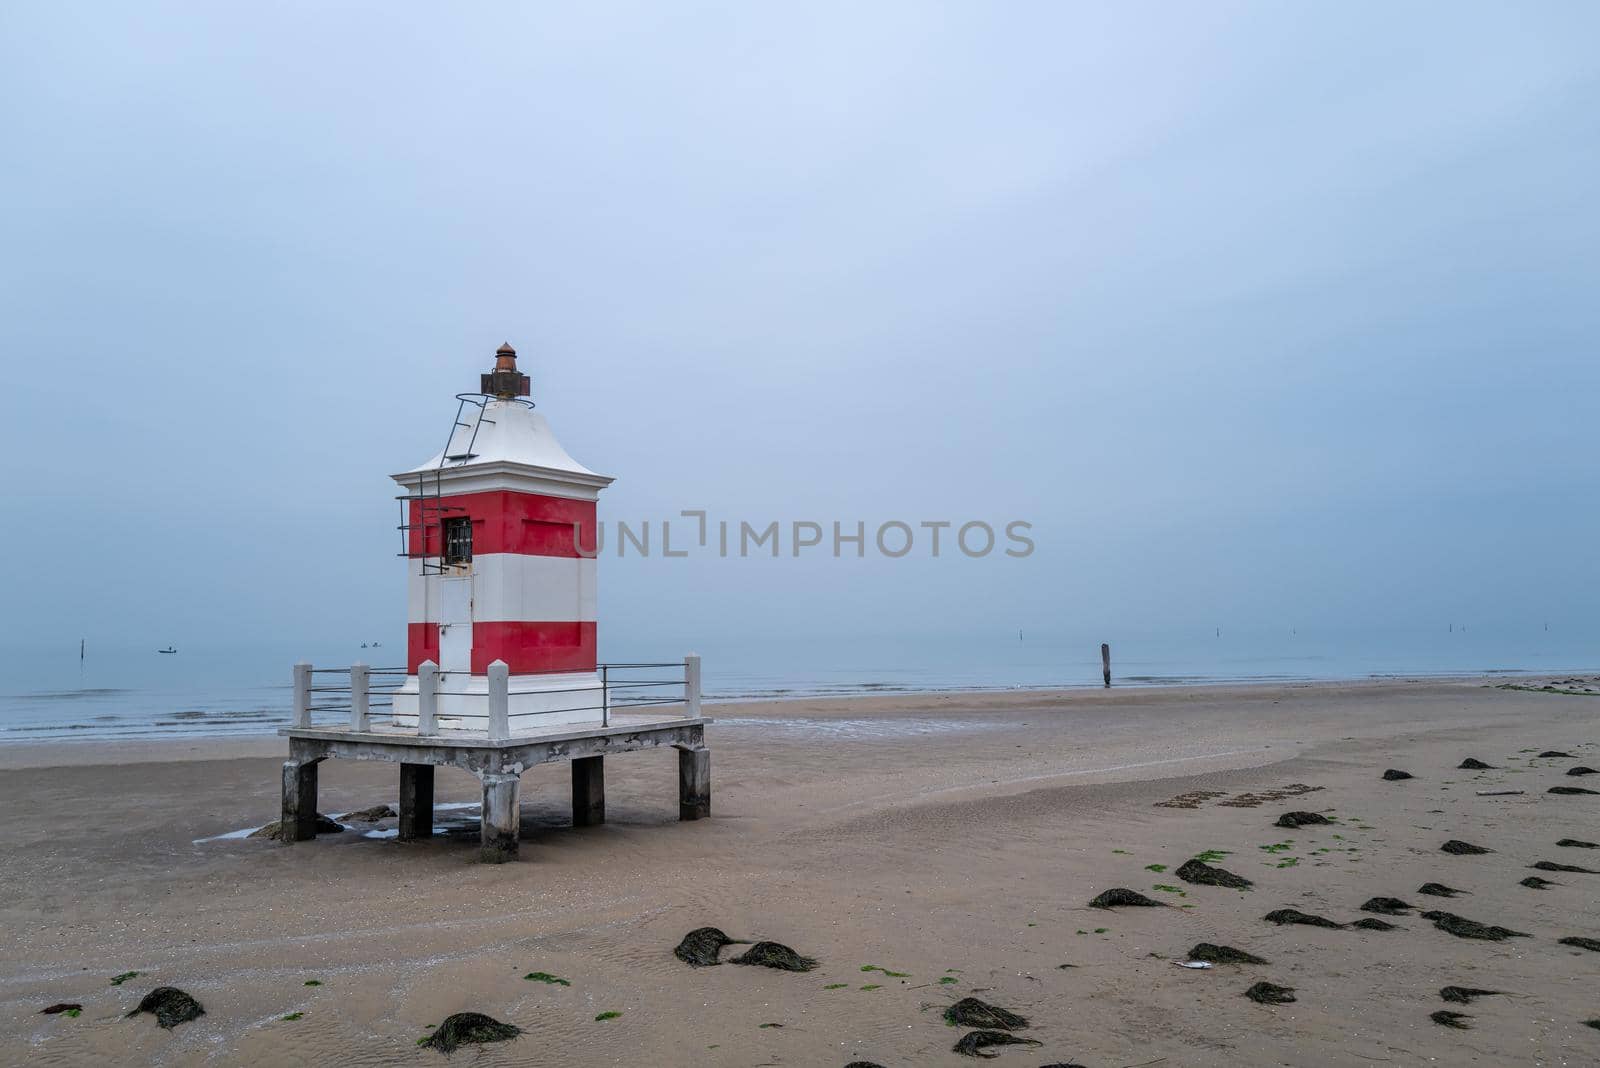 Small red white wooden lighthouse on wintry sandy beach without people.